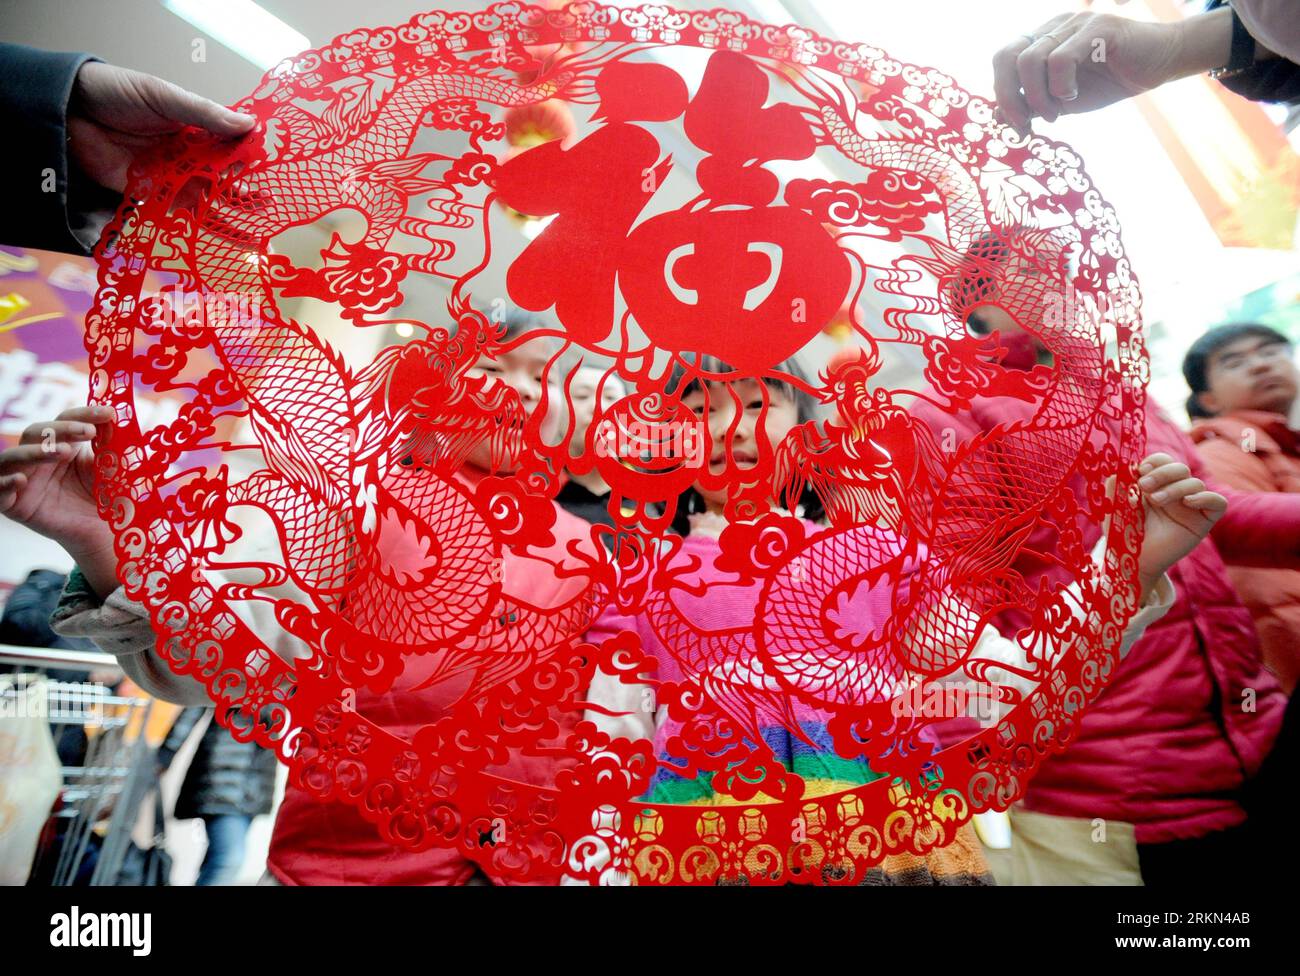 Bildnummer: 56968459  Datum: 25.01.2012  Copyright: imago/Xinhua (120126) -- SHENYANG, Jan. 26, 2012 (Xinhua) -- Two young girls look at the dragon-shaped paper-cutting works in Shenyang, capital of northeast China s Liaoning Province, Jan. 25, 2012. Handicrafts inspired by dragon became very popular in China as the Spring Festival, which fell on Jan. 23, marked the start of the Year of Dragon according to the Chinese zodiac. (Xinhua/Zhang Wenkui) (ry) CHINA-DRAGON-IMAGE-POPULARITY (CN) PUBLICATIONxNOTxINxCHN Gesellschaft Tradition Figur Jahr des Drachen xbs x0x 2012 quer      56968459 Date 25 Stock Photo